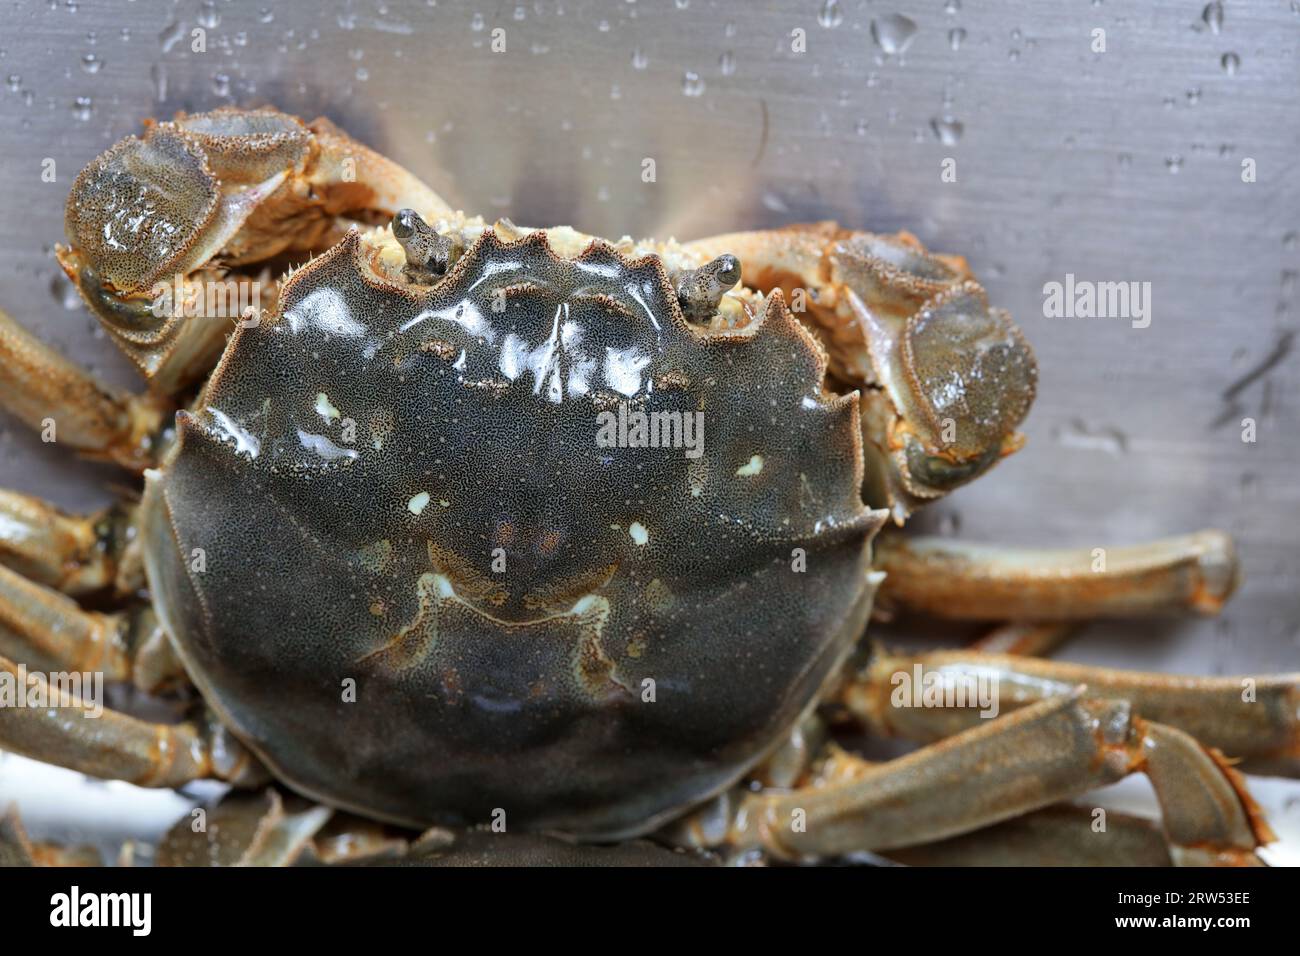 A close-up of fresh river crabs Stock Photo